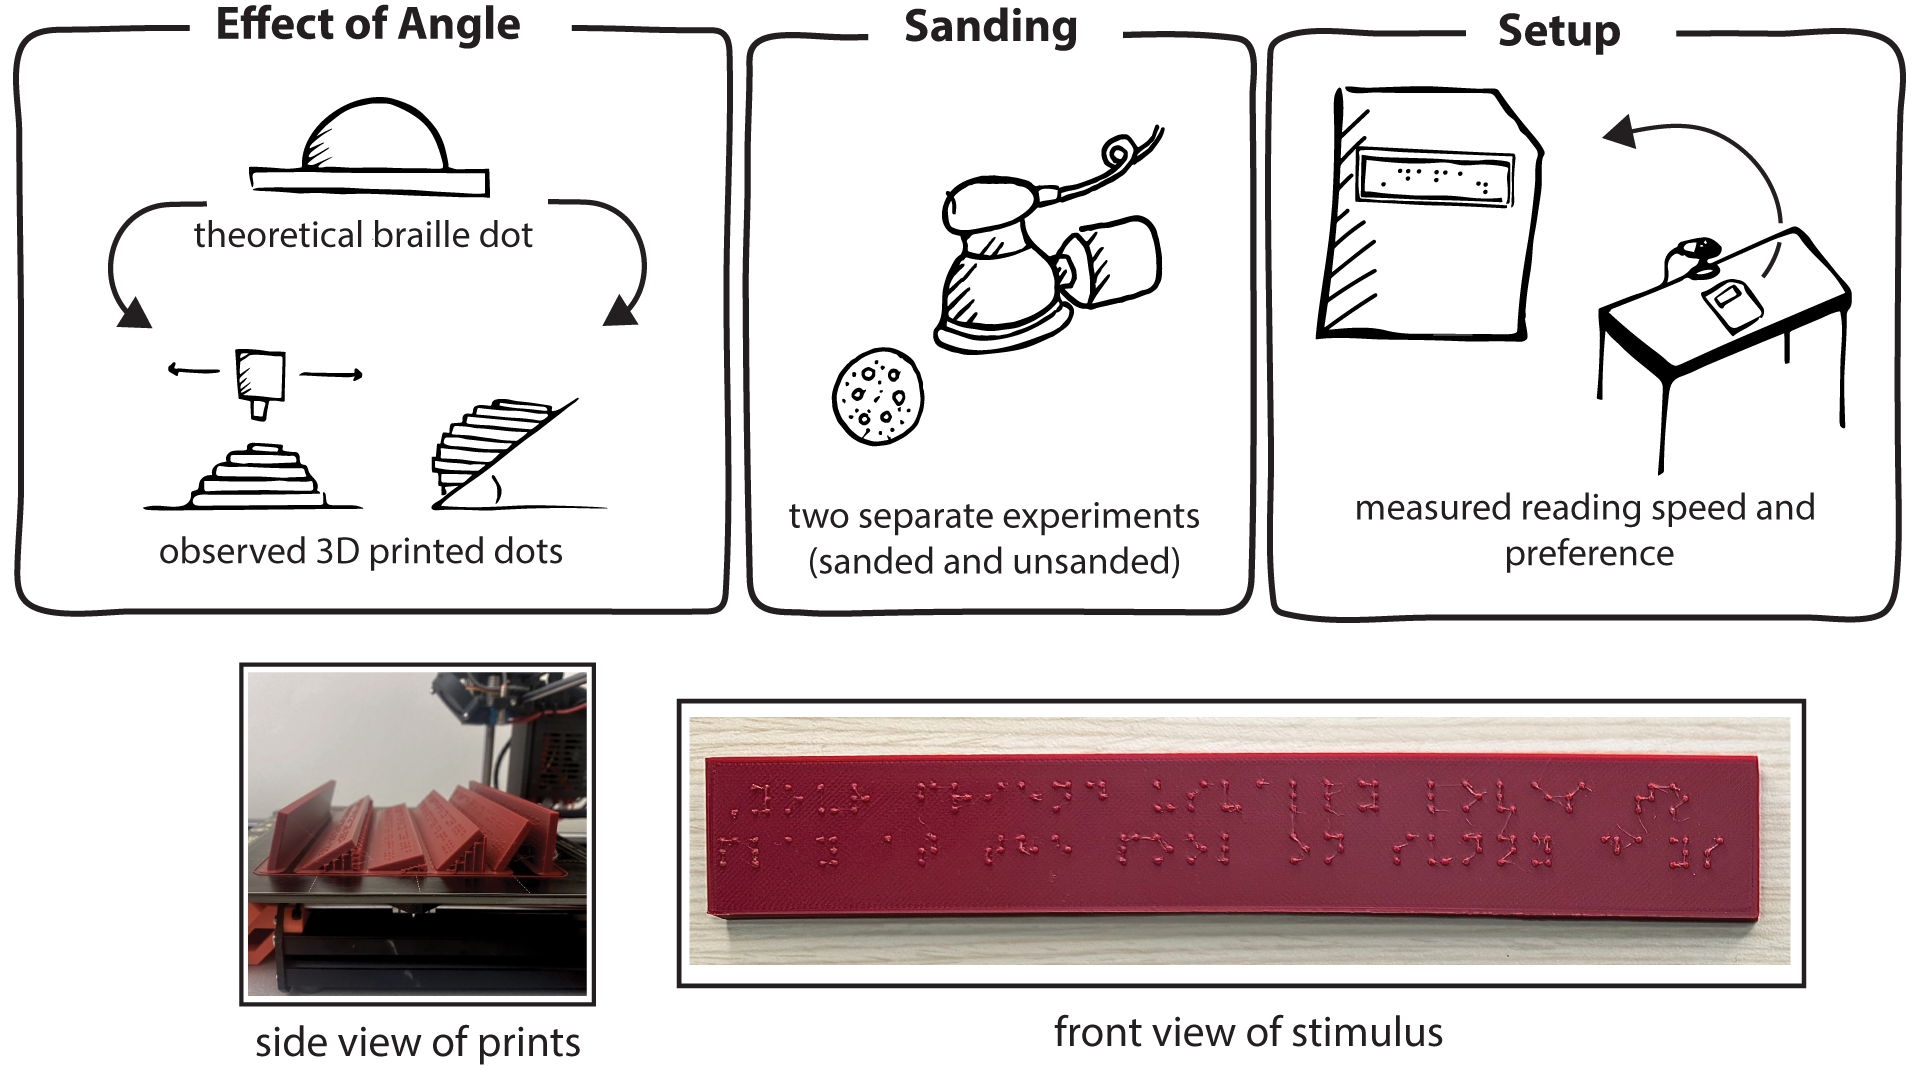 Hand-drawn sketches of various elements of the experiment. On the left, the drawings depict the differences between a braille cell's theoretical and actual shapes. In the middle, the sketches show a depiction of a sander, and the annotations read: two sanded experiments (sanded and unsanded). On the right, the drawings show the experimental setup, including a sketch of the table and the page of braille with the stimulus. At the bottom are a side view of the printer with plates printed at various angles, and a front view of the braille in one print.